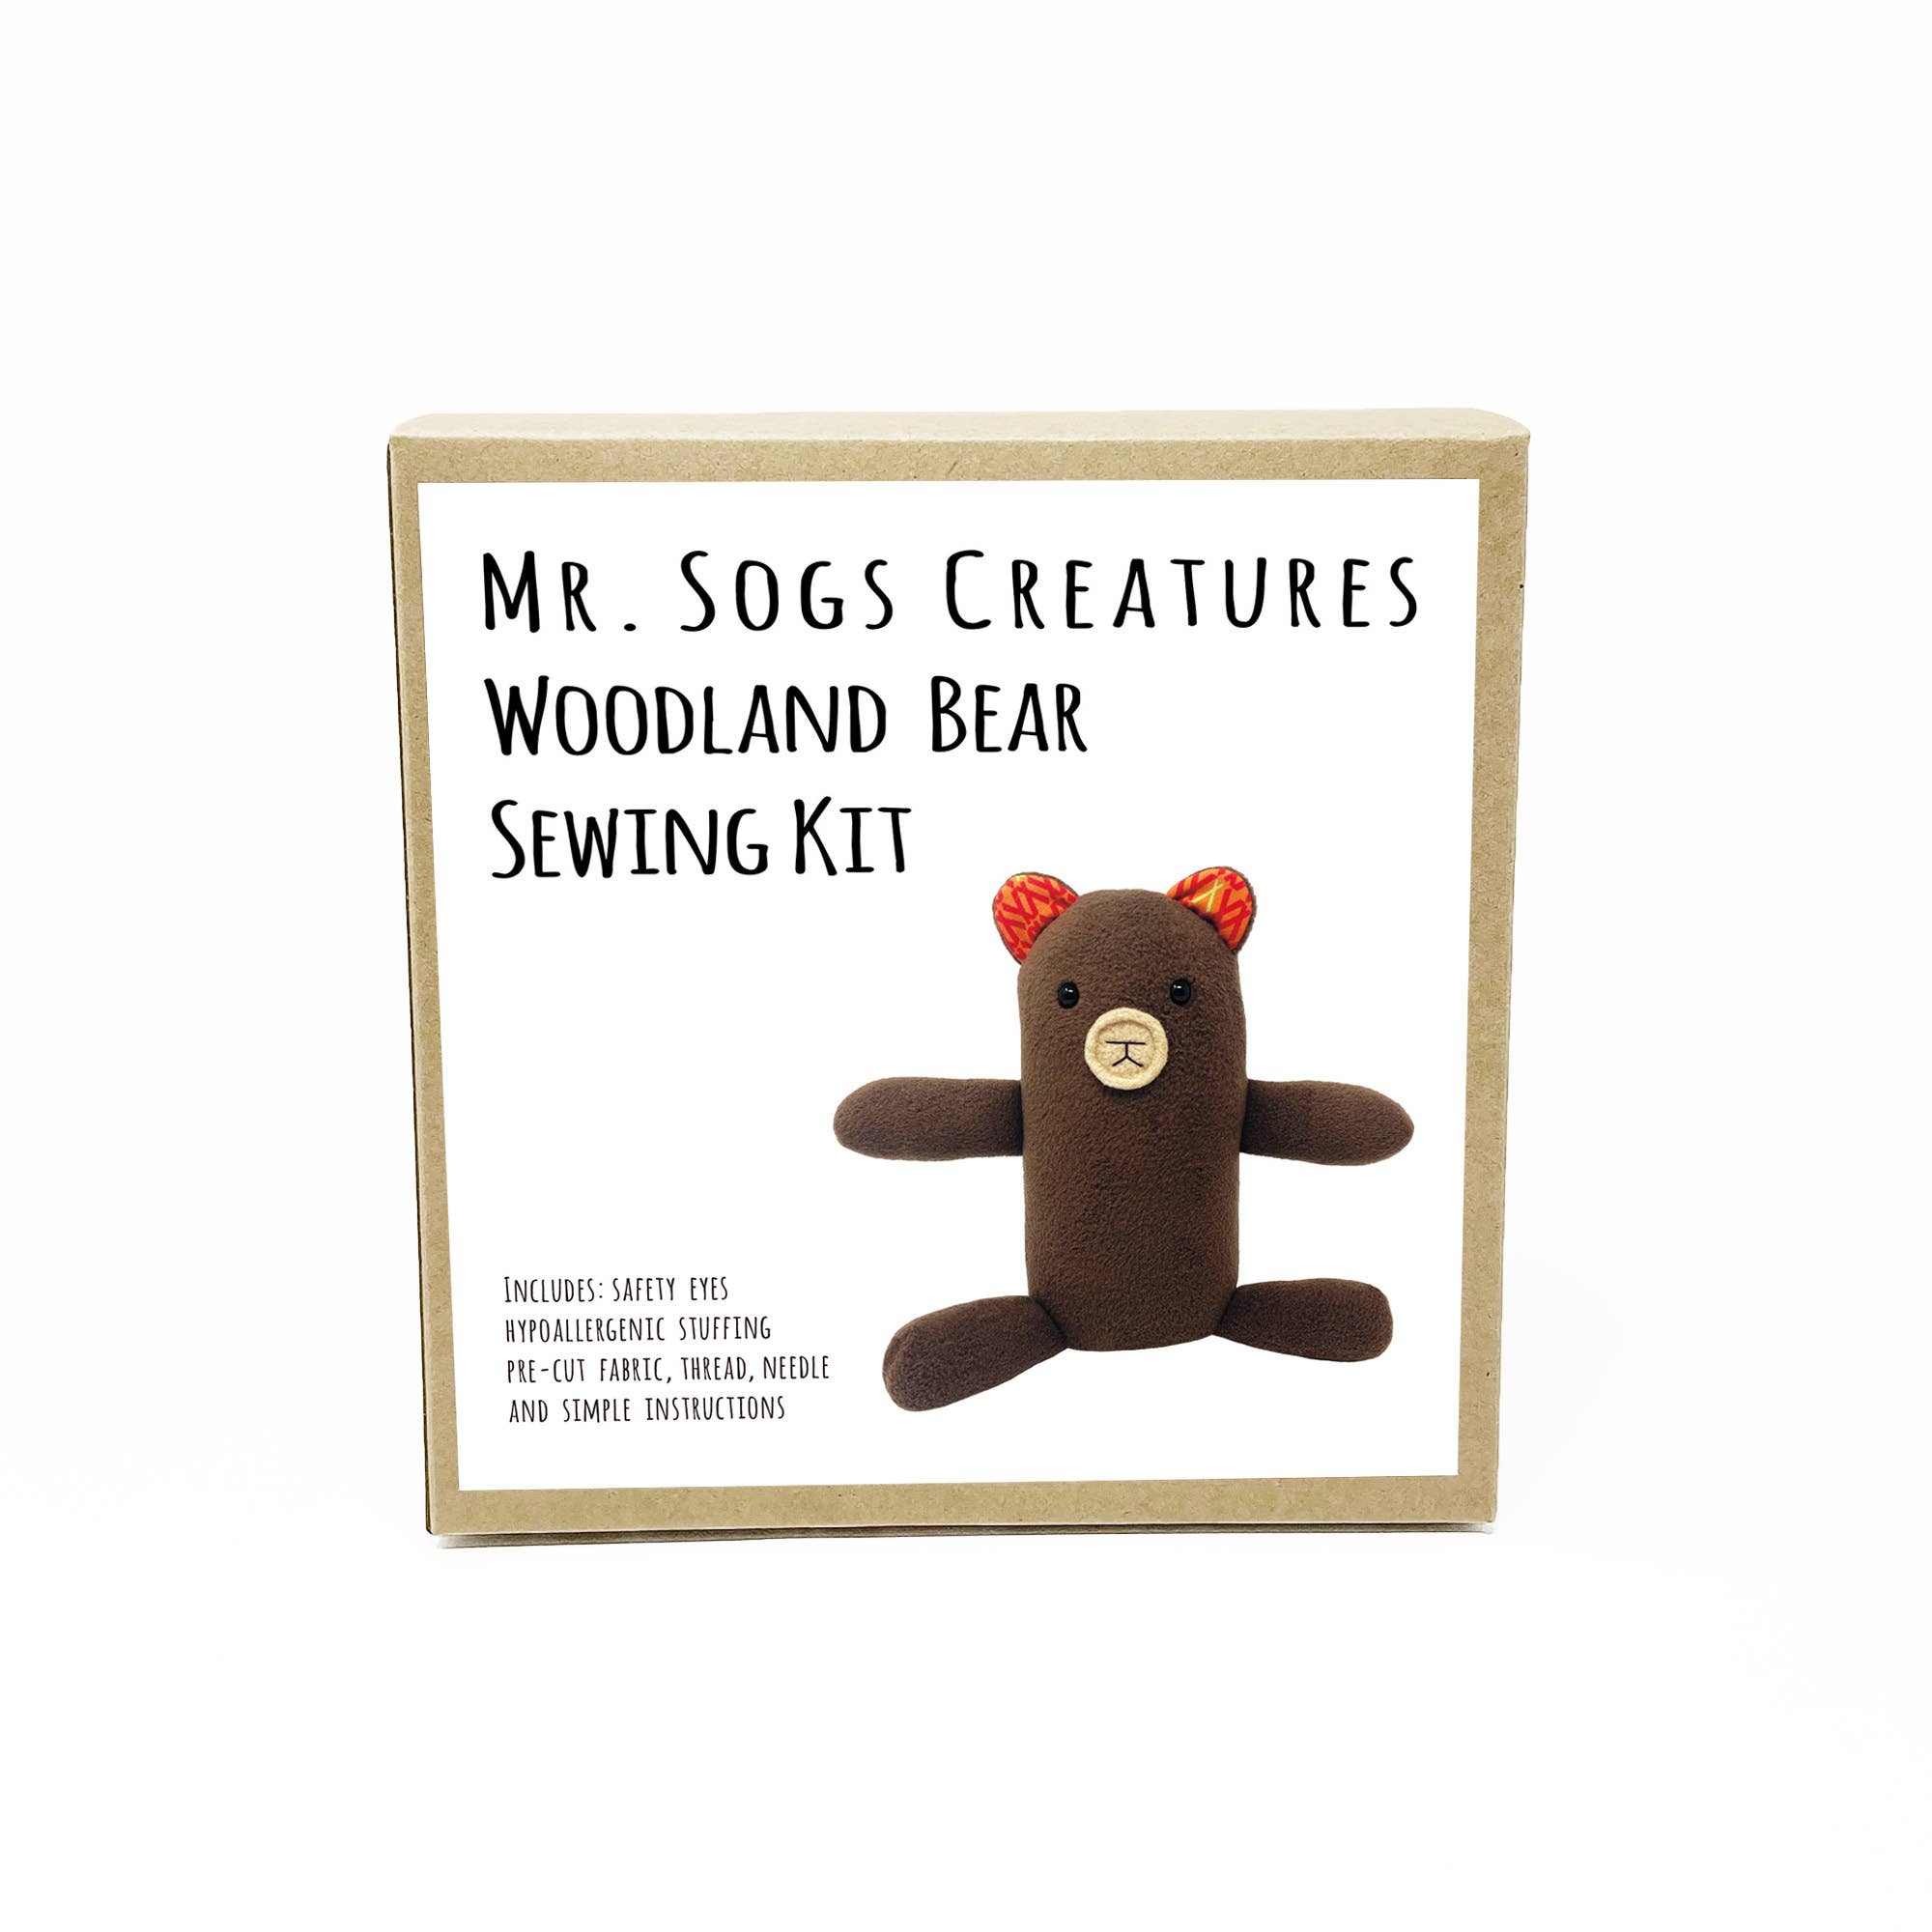 Mr. Sogs Creatures Sewing Kit | Woodland Bear